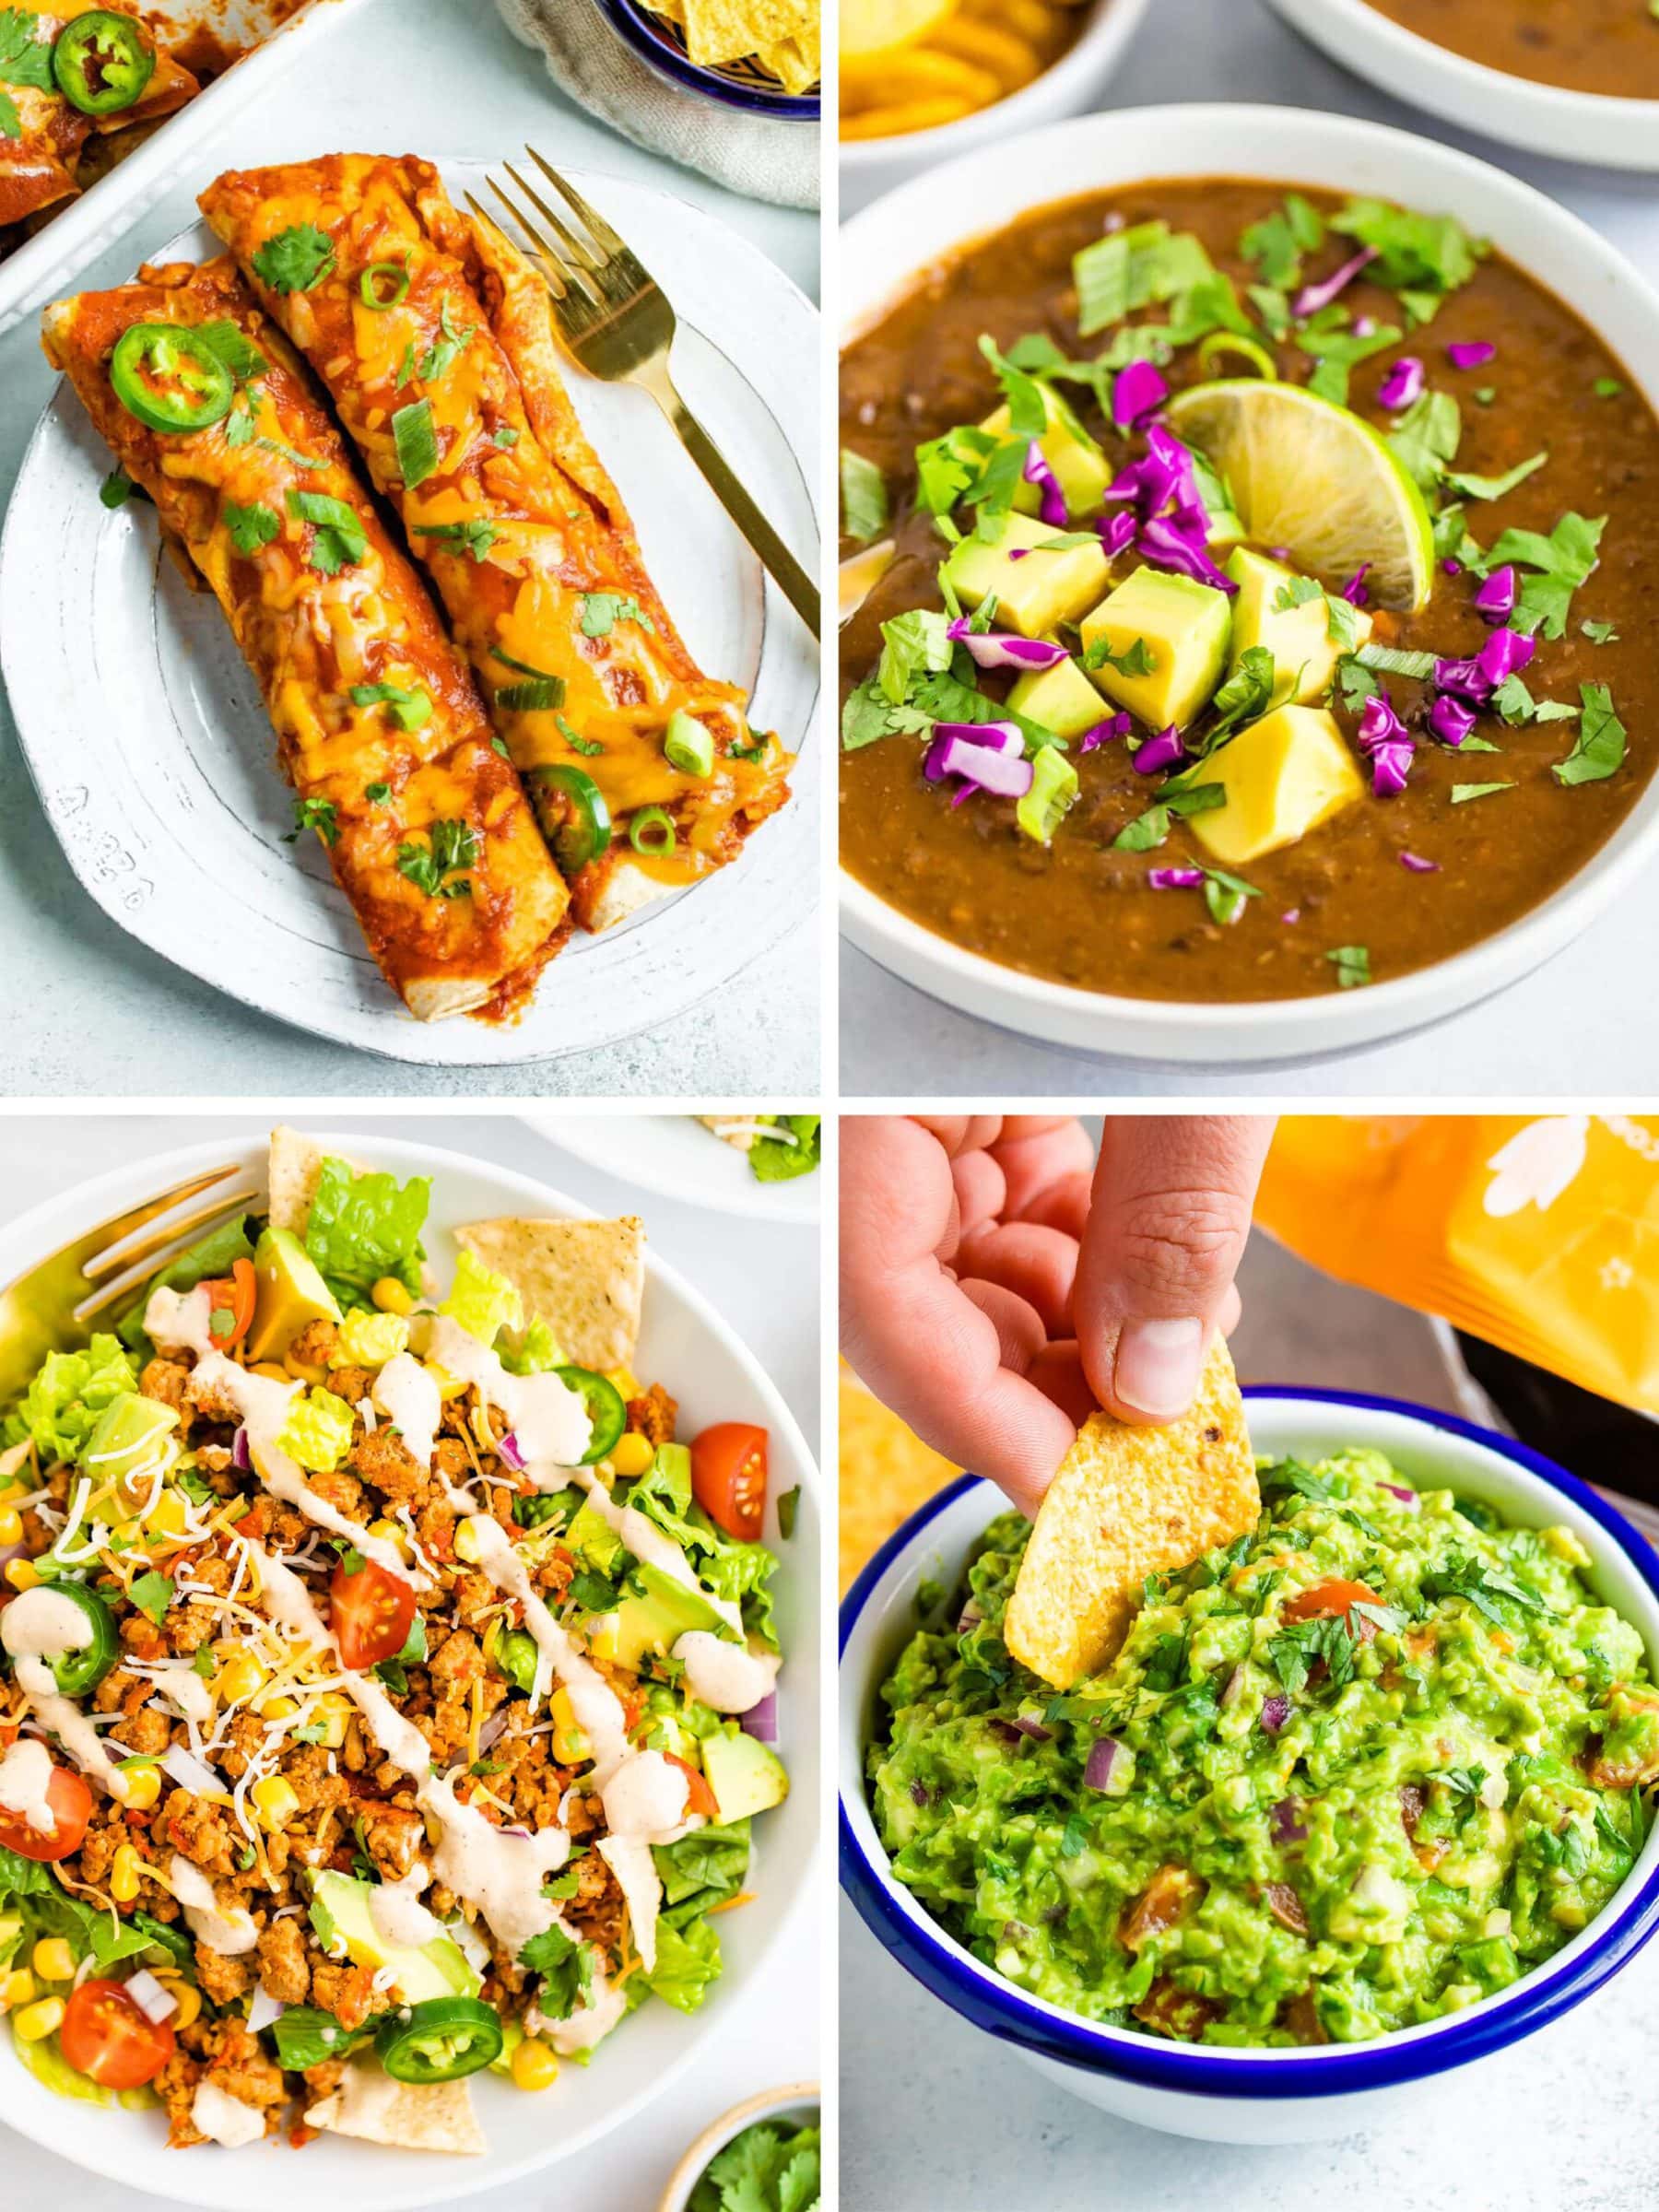 https://www.eatingbirdfood.com/wp-content/uploads/2022/02/Healthy-Mexican-Recipes-BLOG-IMAGE-min-scaled.jpg